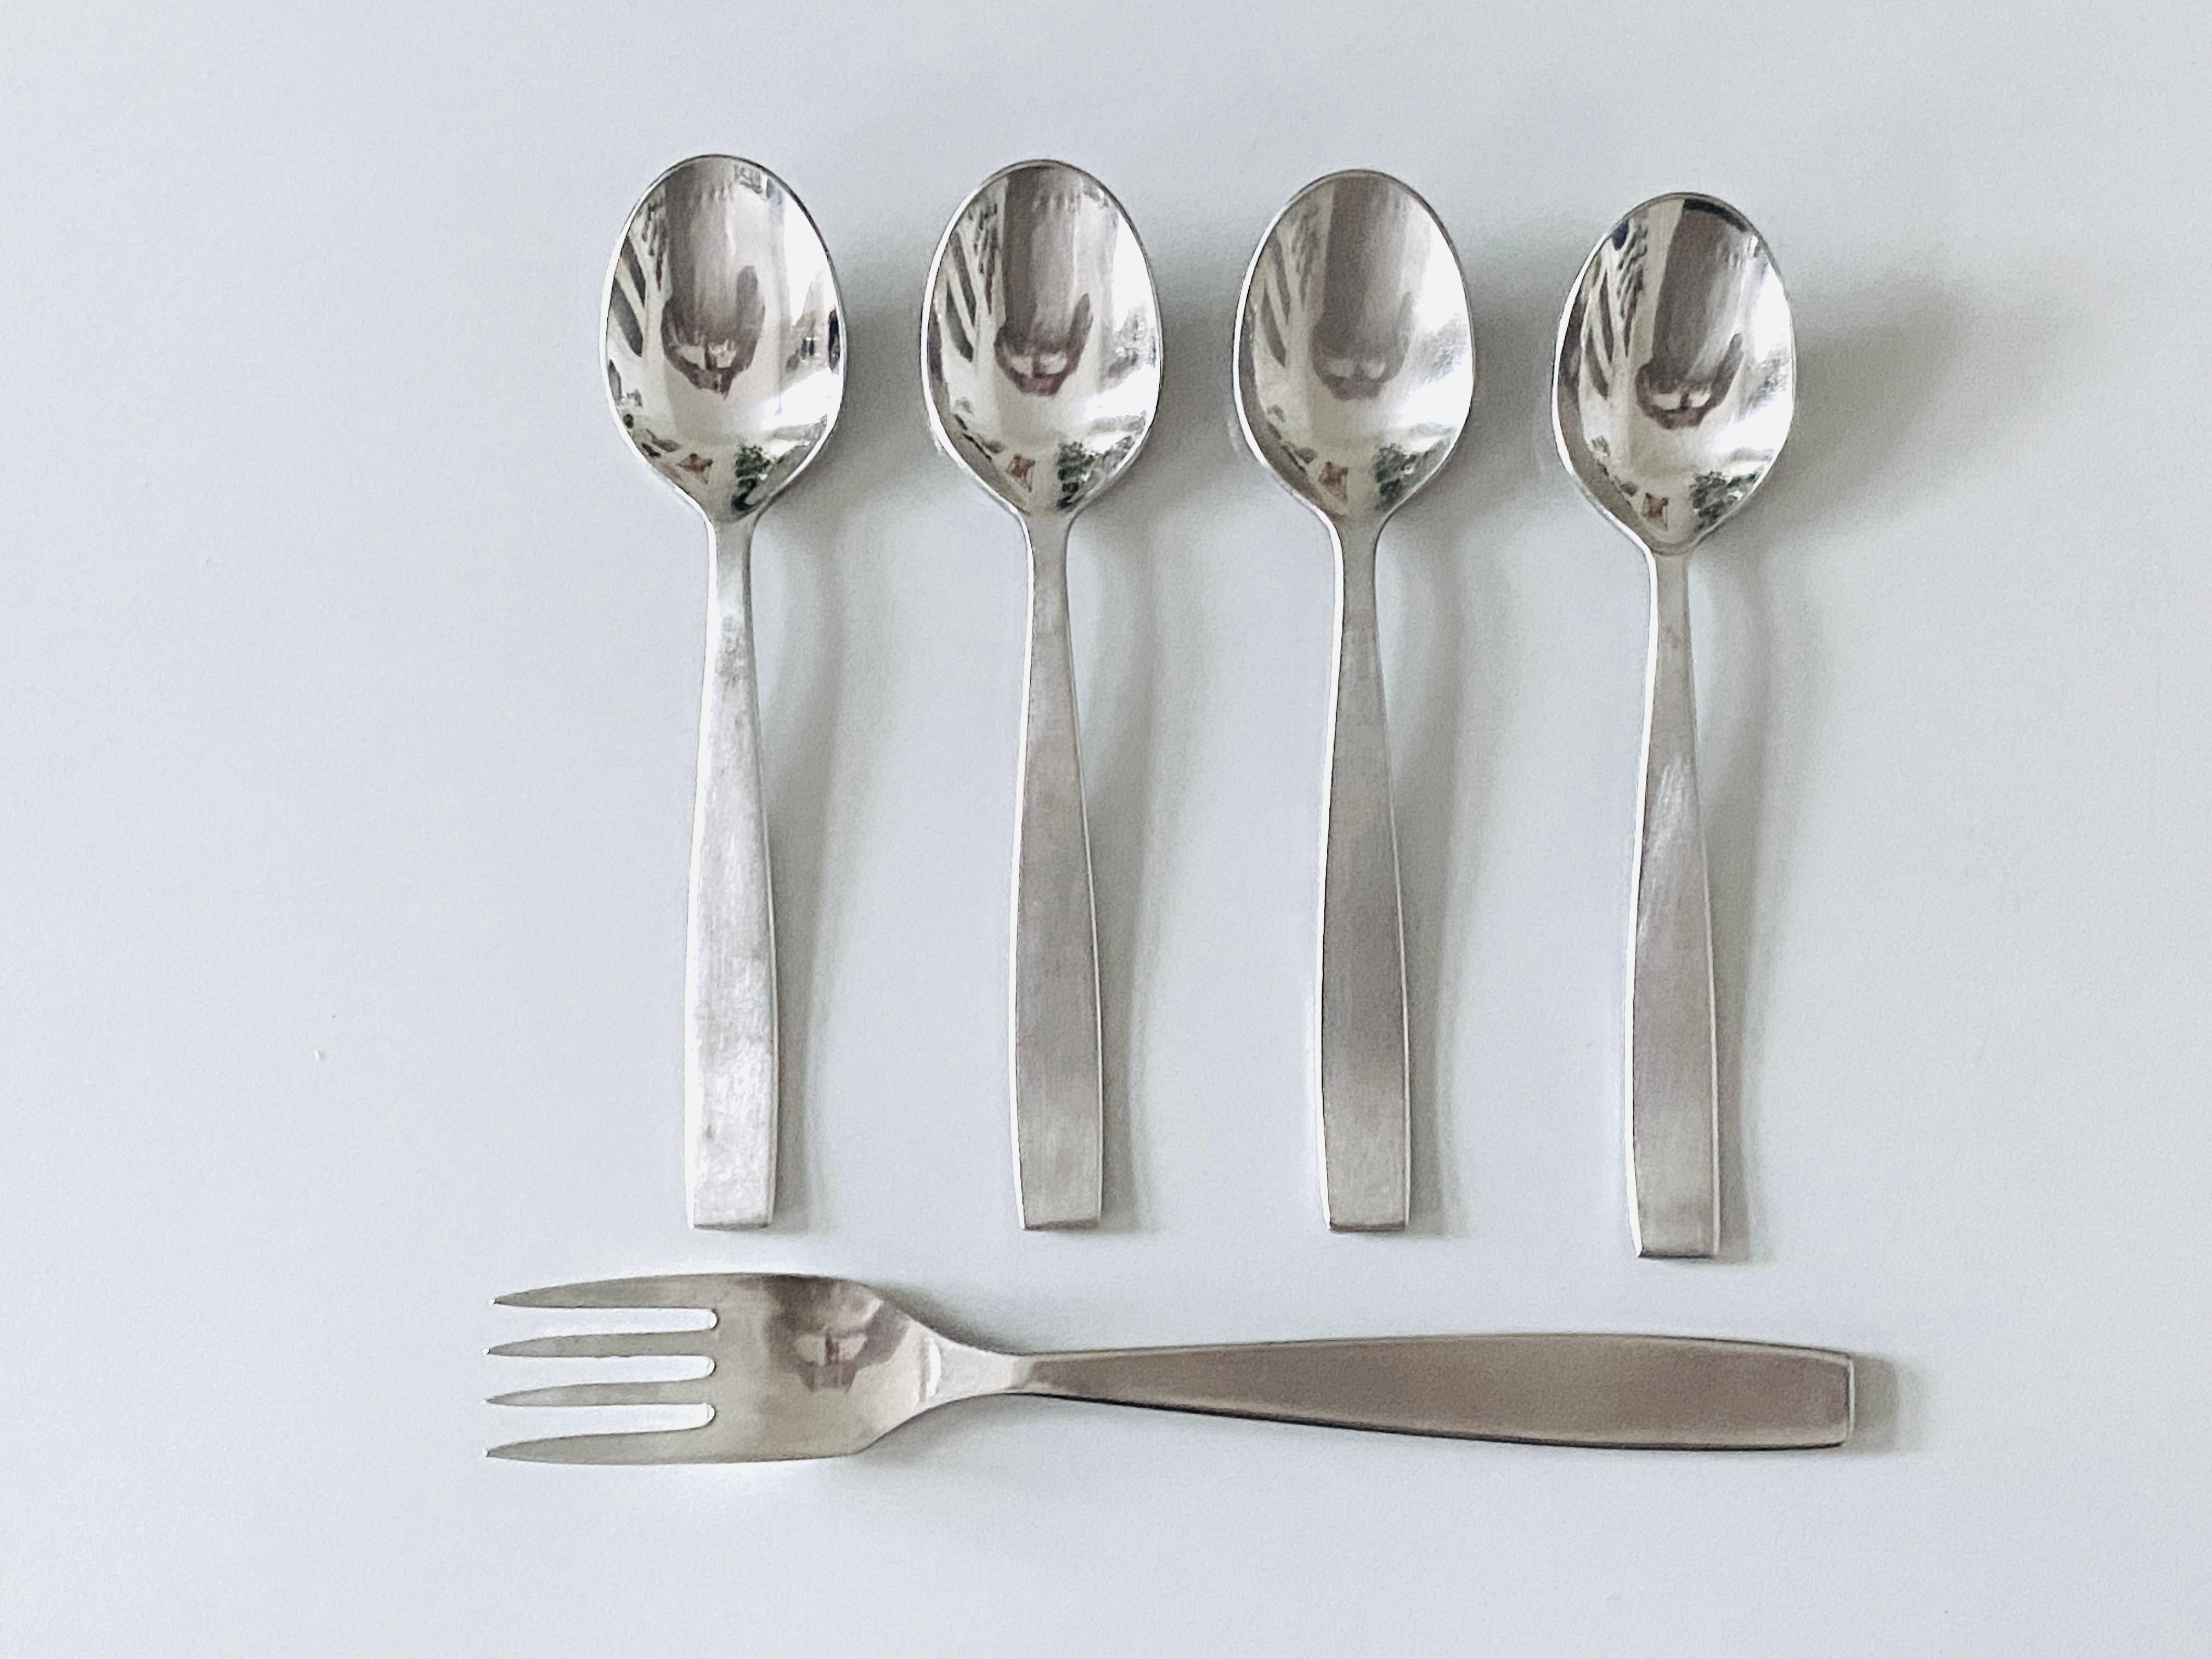 Mid-Century Modern Four Spoons And A Fourk Amboss Austria 2050 Flatware by Helmut Alder, 1950s